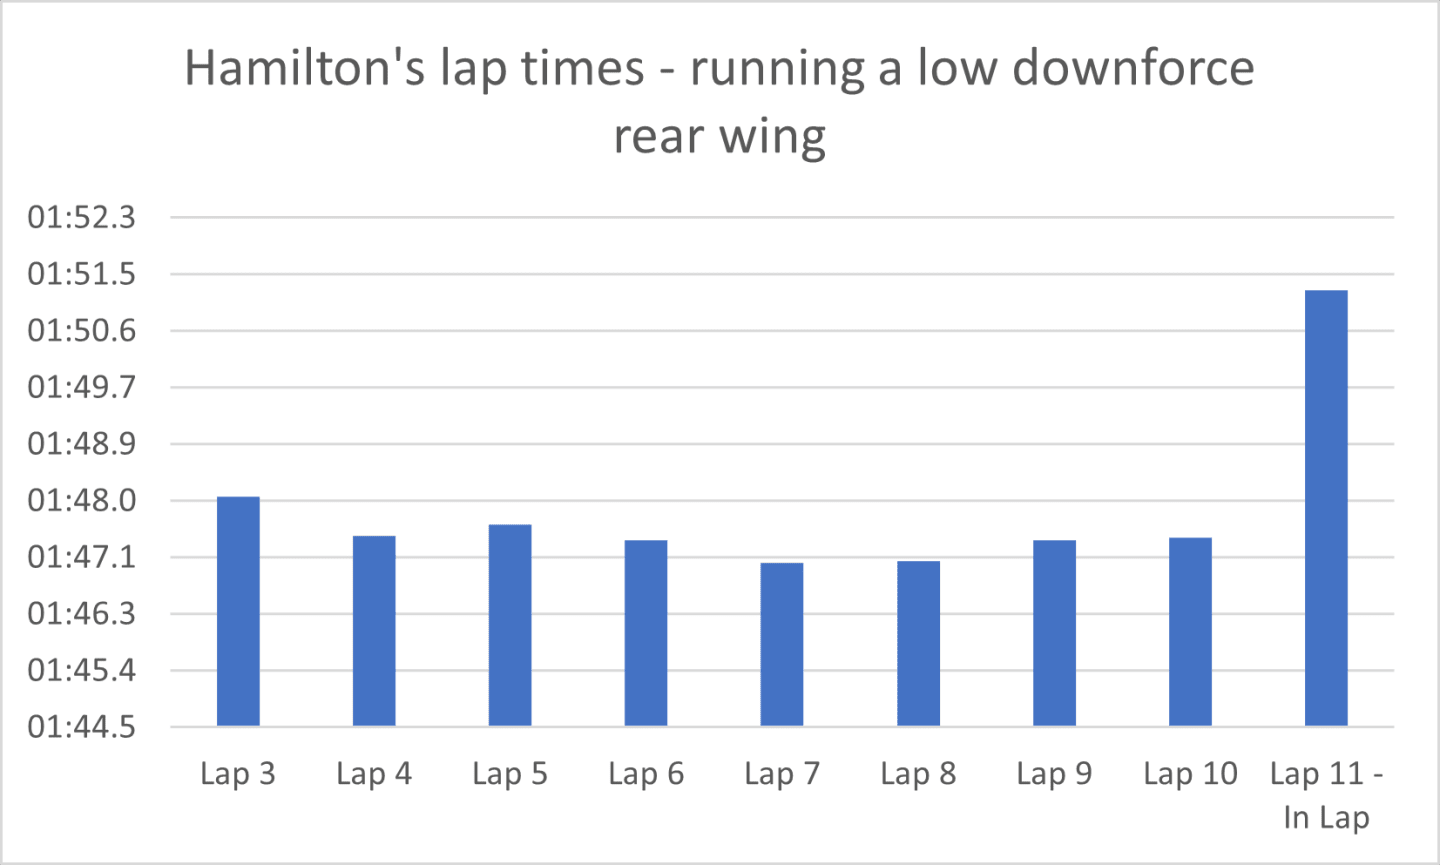 Hamilton was only able to go a couple of laps longer than the Ferrari, and also had a slow in-lap